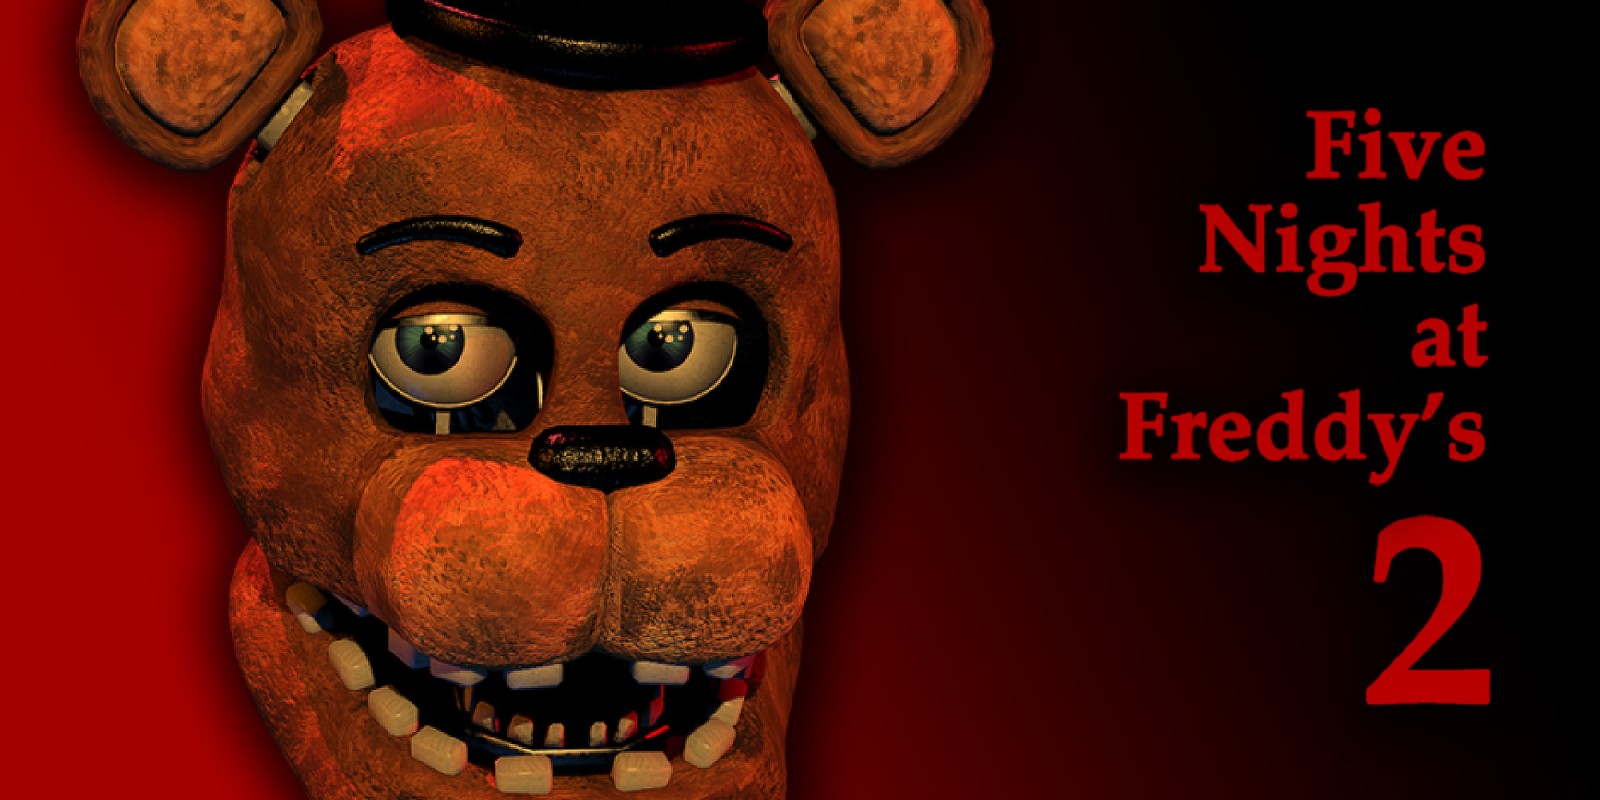 Five Nights at Freddy's 2 Switch footage